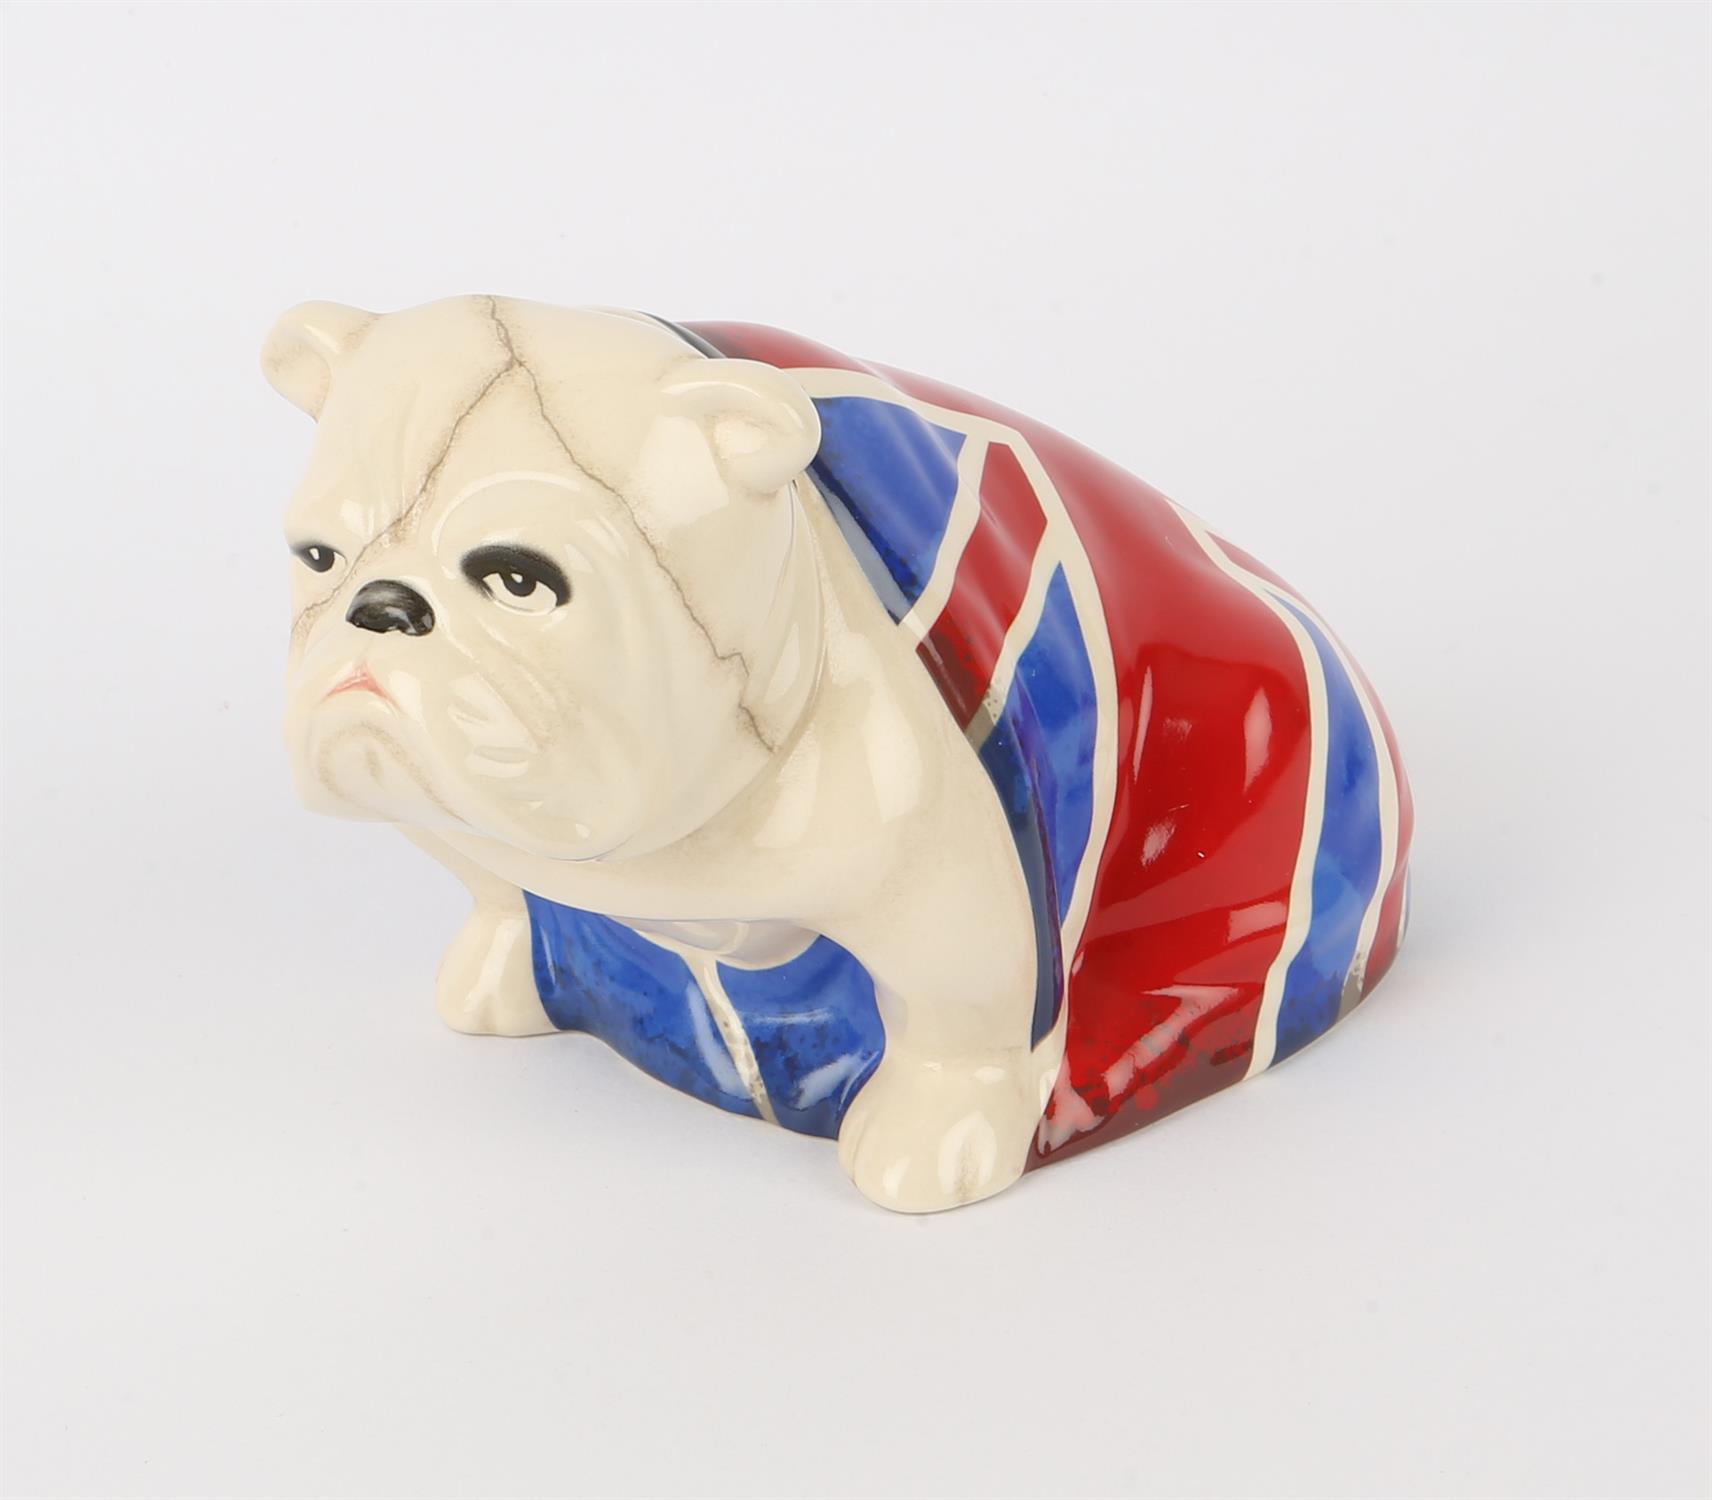 James Bond 007 - Royal Doulton Spectre 'Jack' china Bulldog figure, issued in 2015,